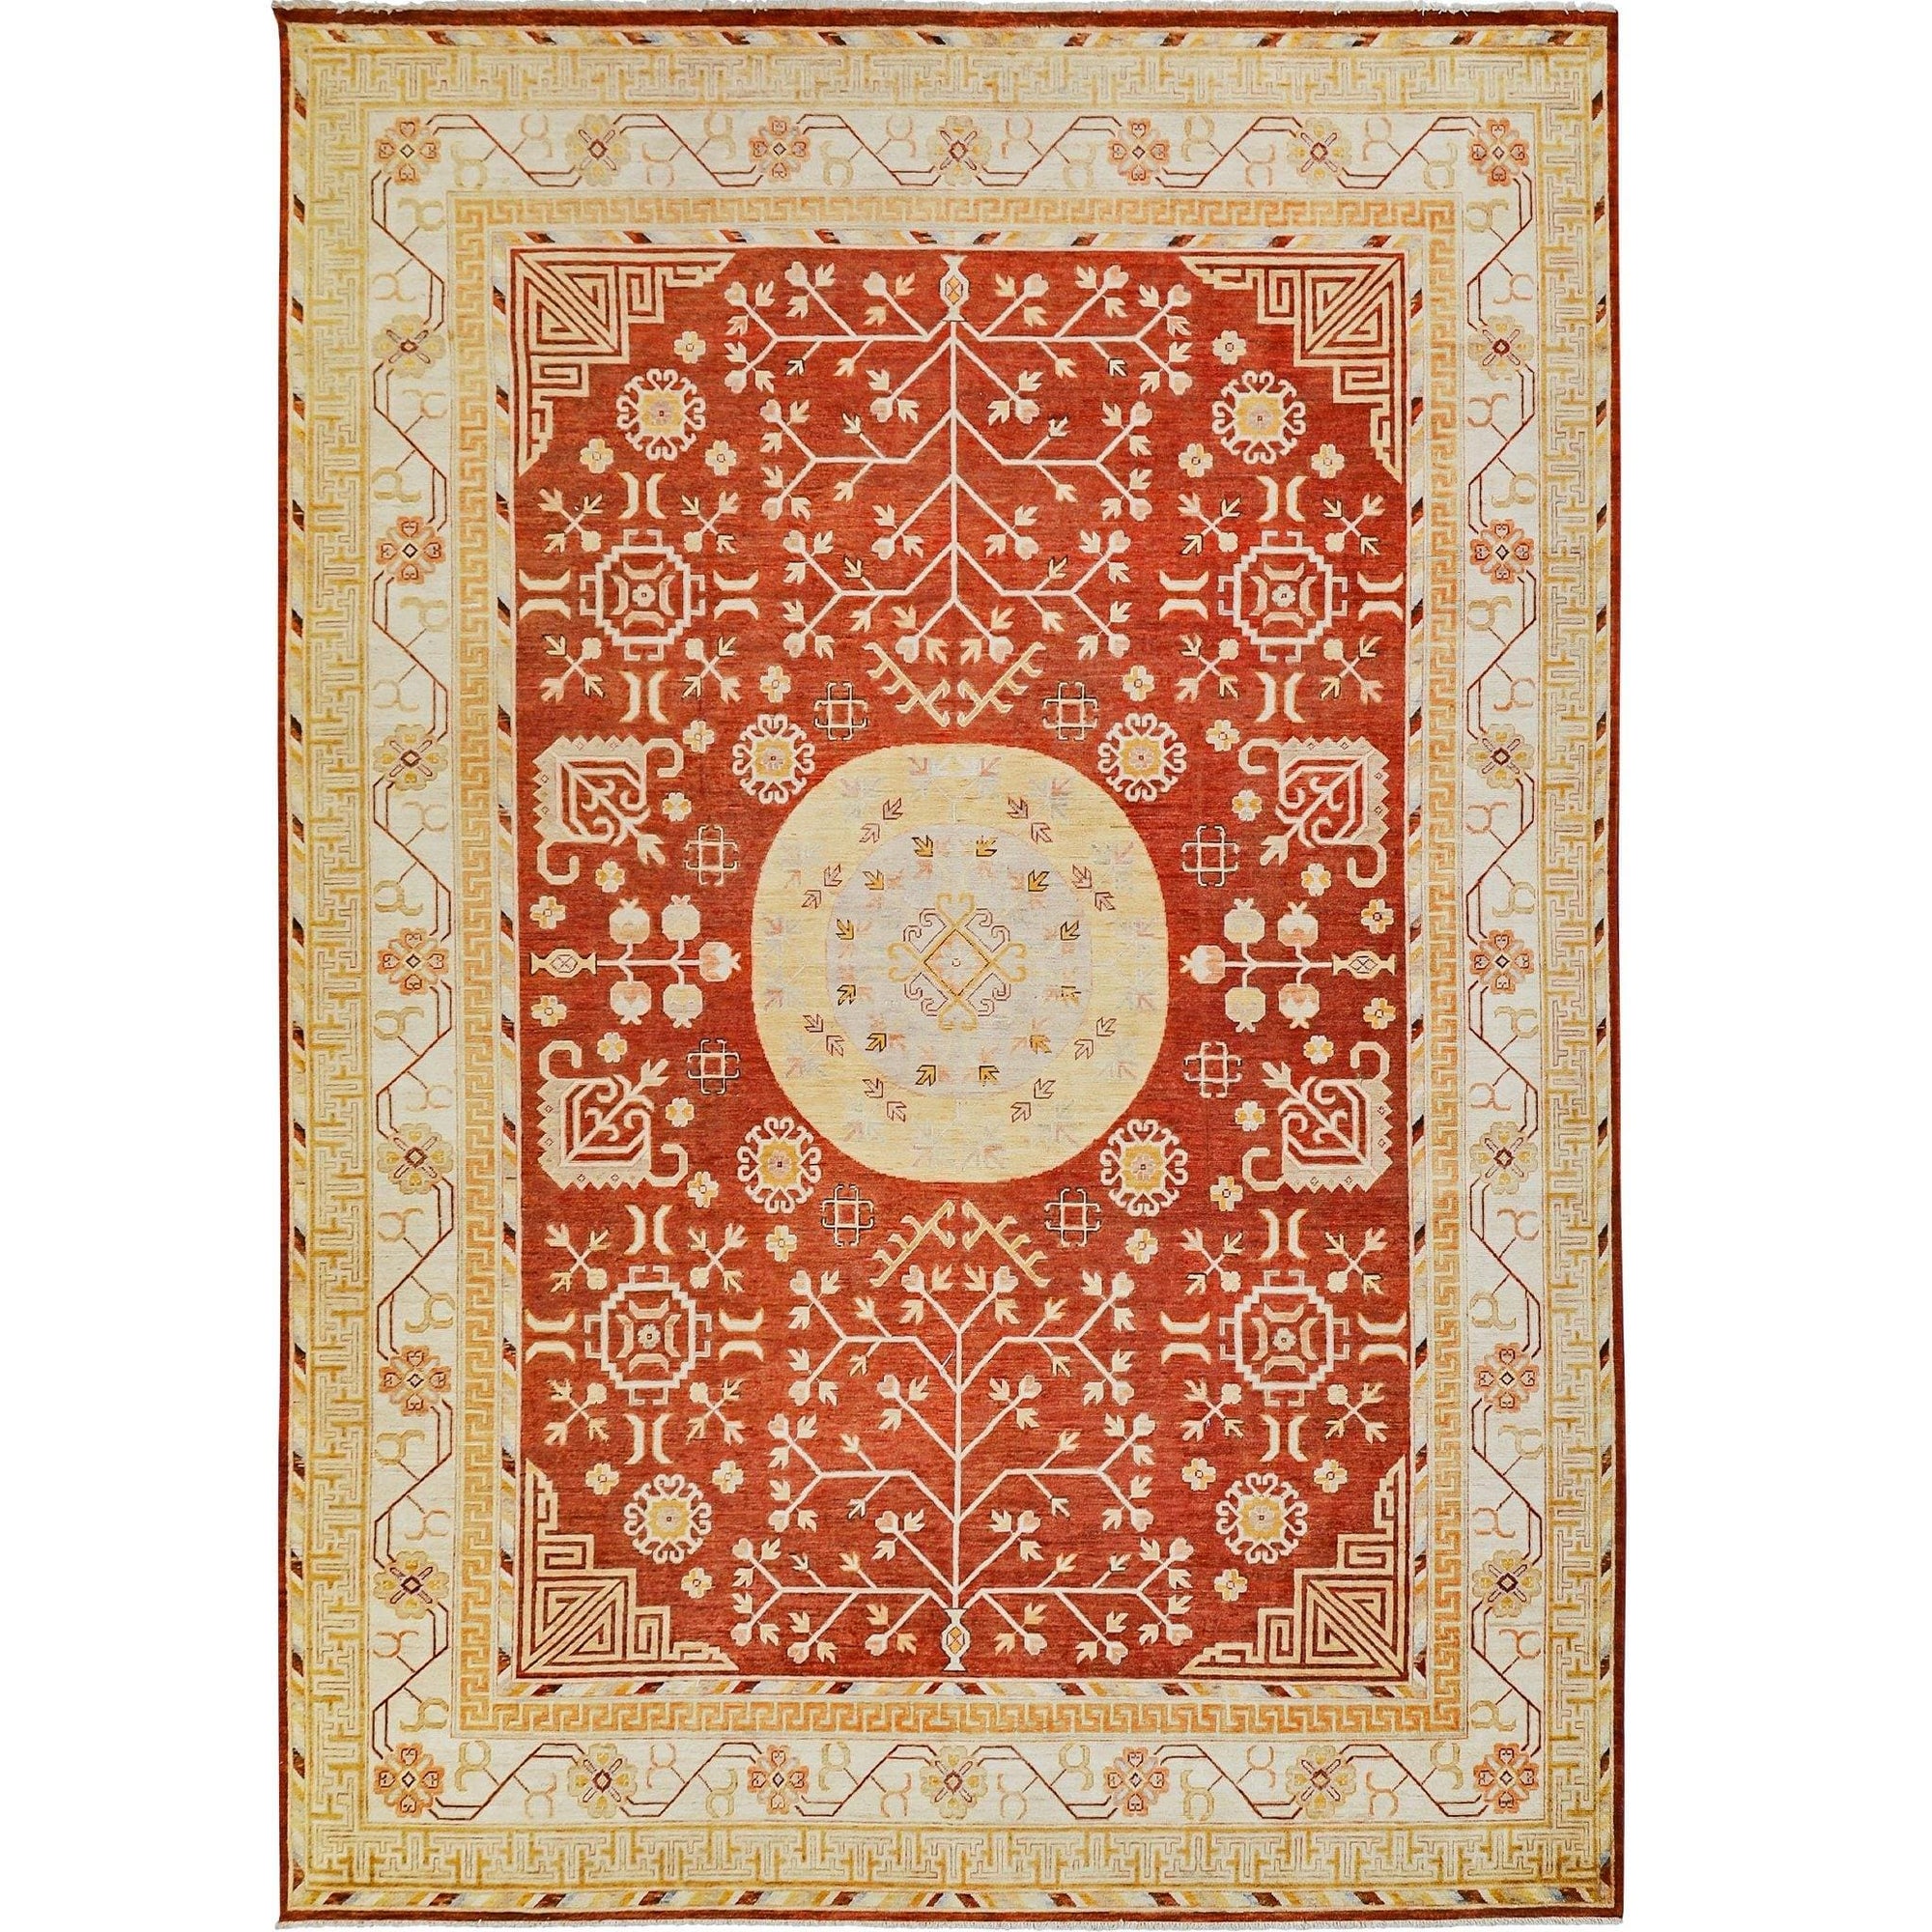 Fine Hand-knotted Wool Rug 274cm x 355cm